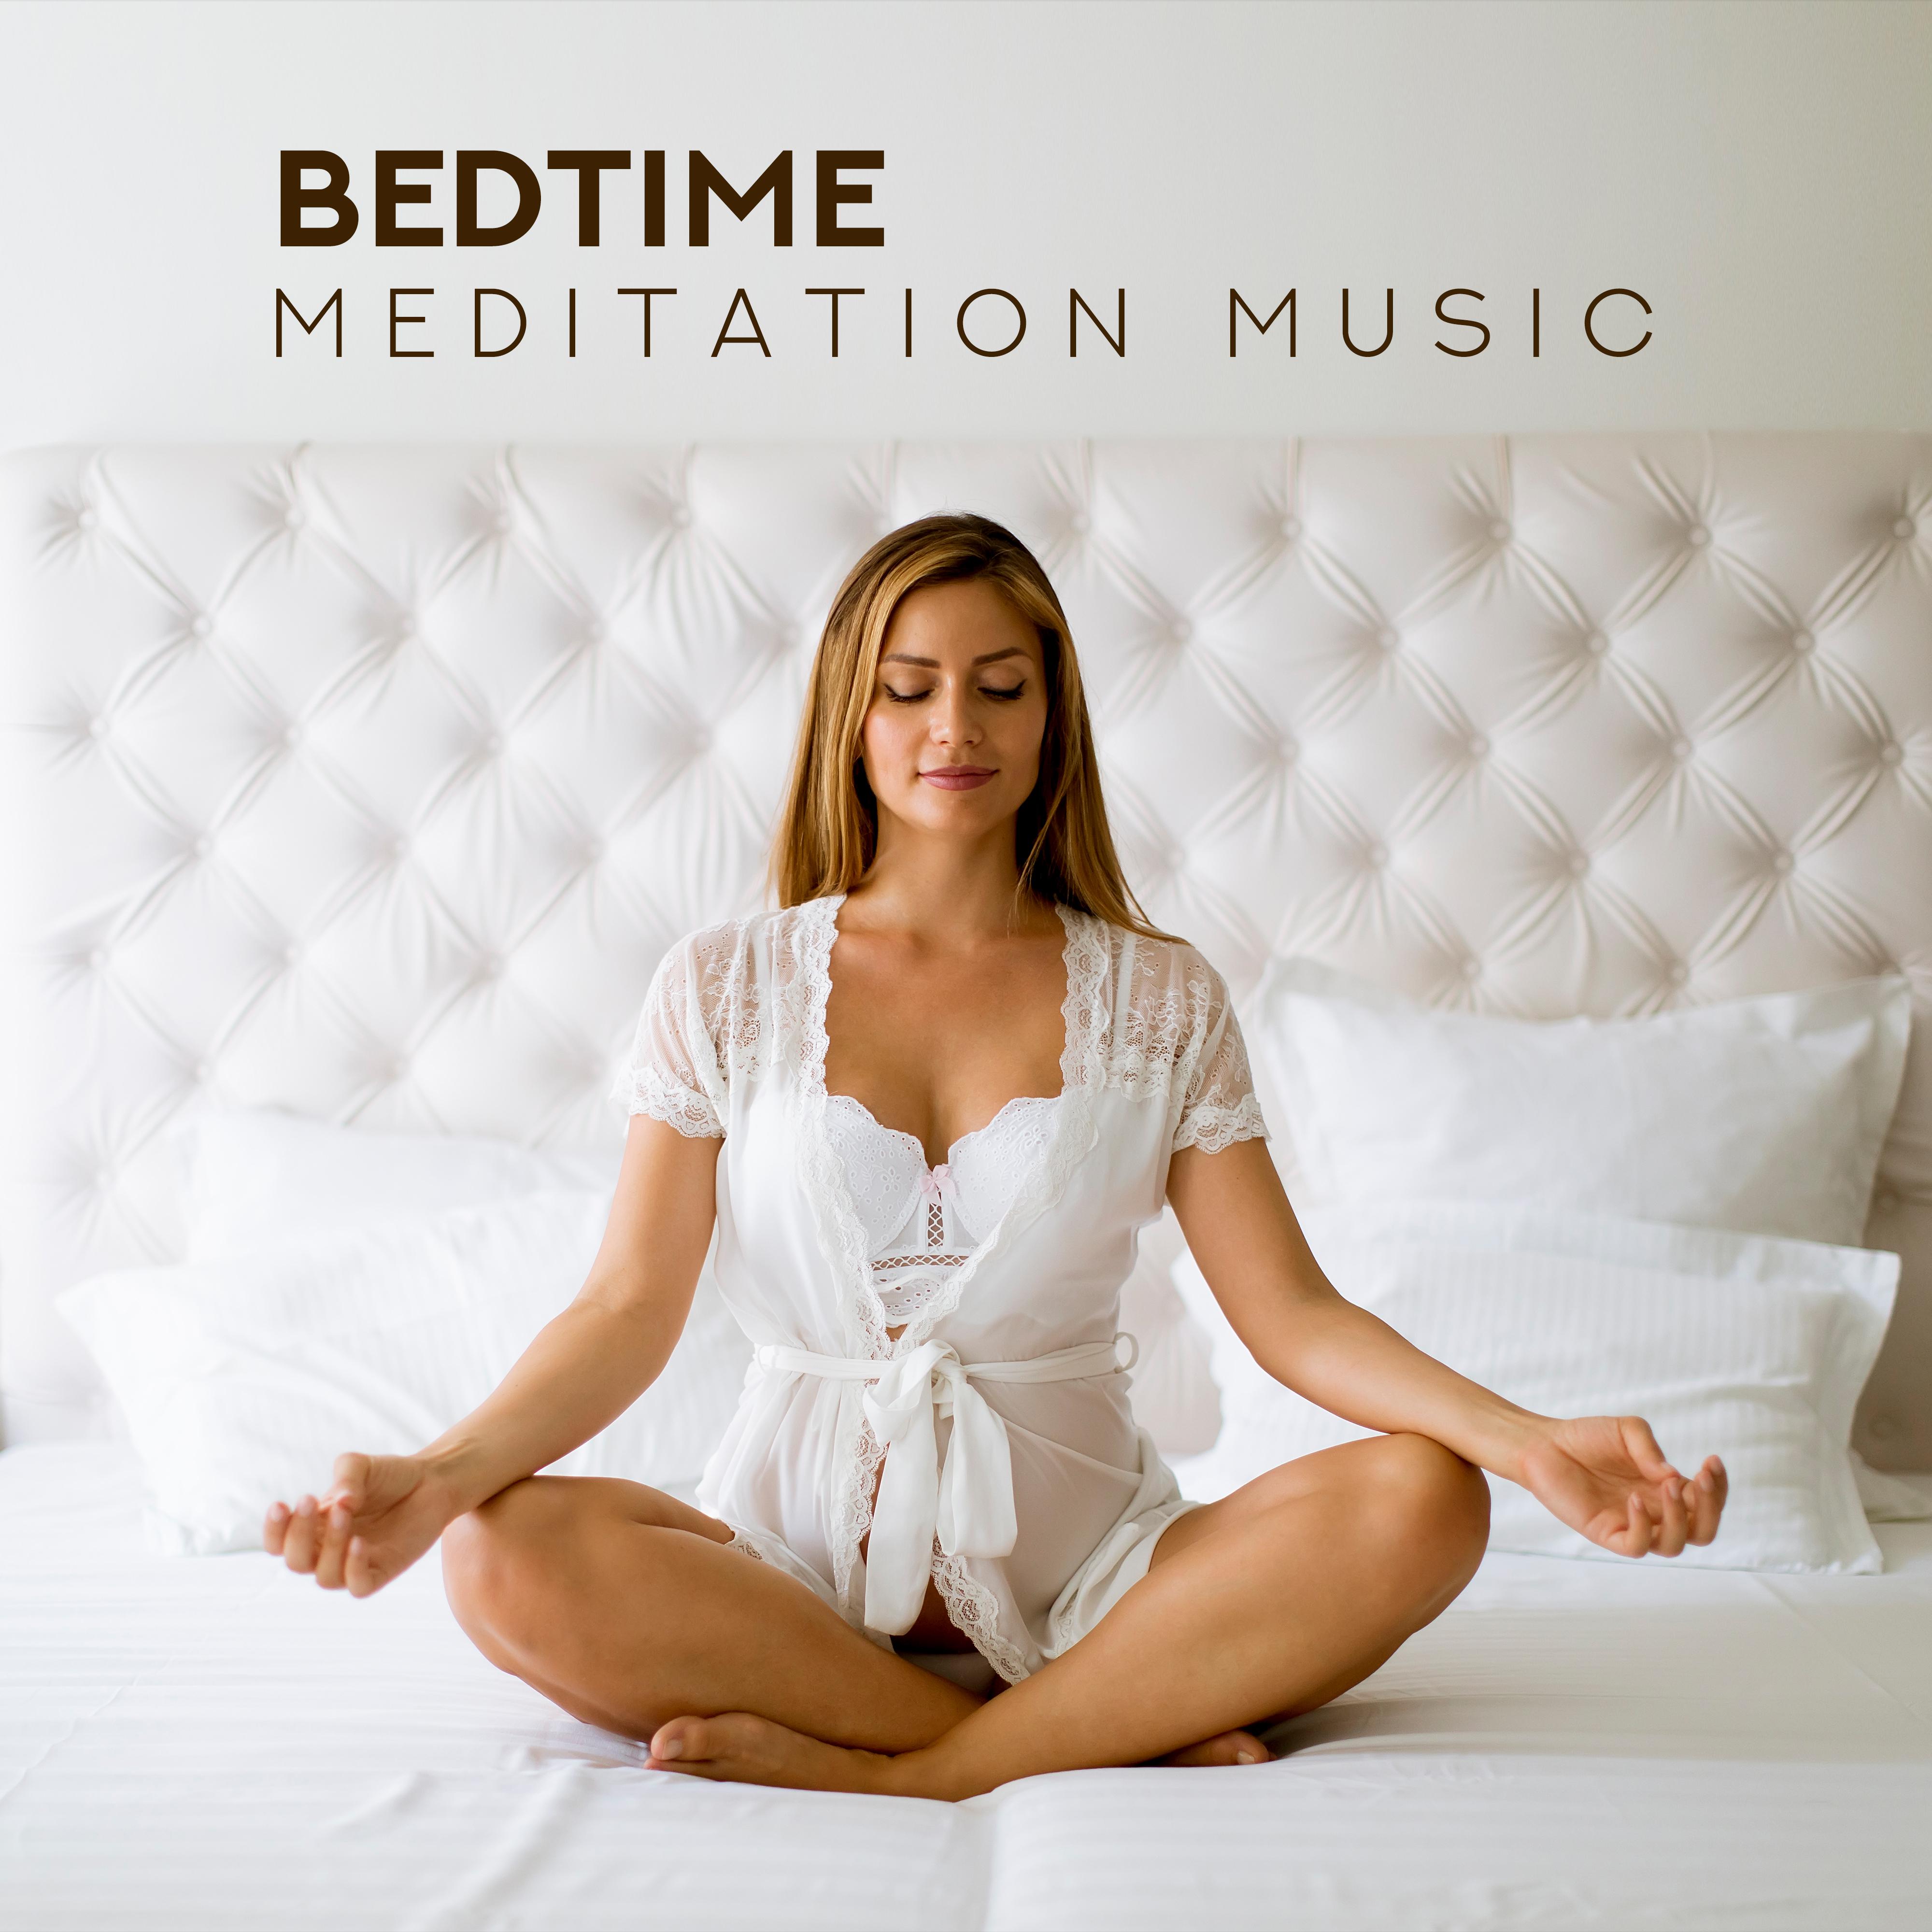 Bedtime Meditation Music - To Free Yourself from the Hardships of Today and Fall Asleep Easily